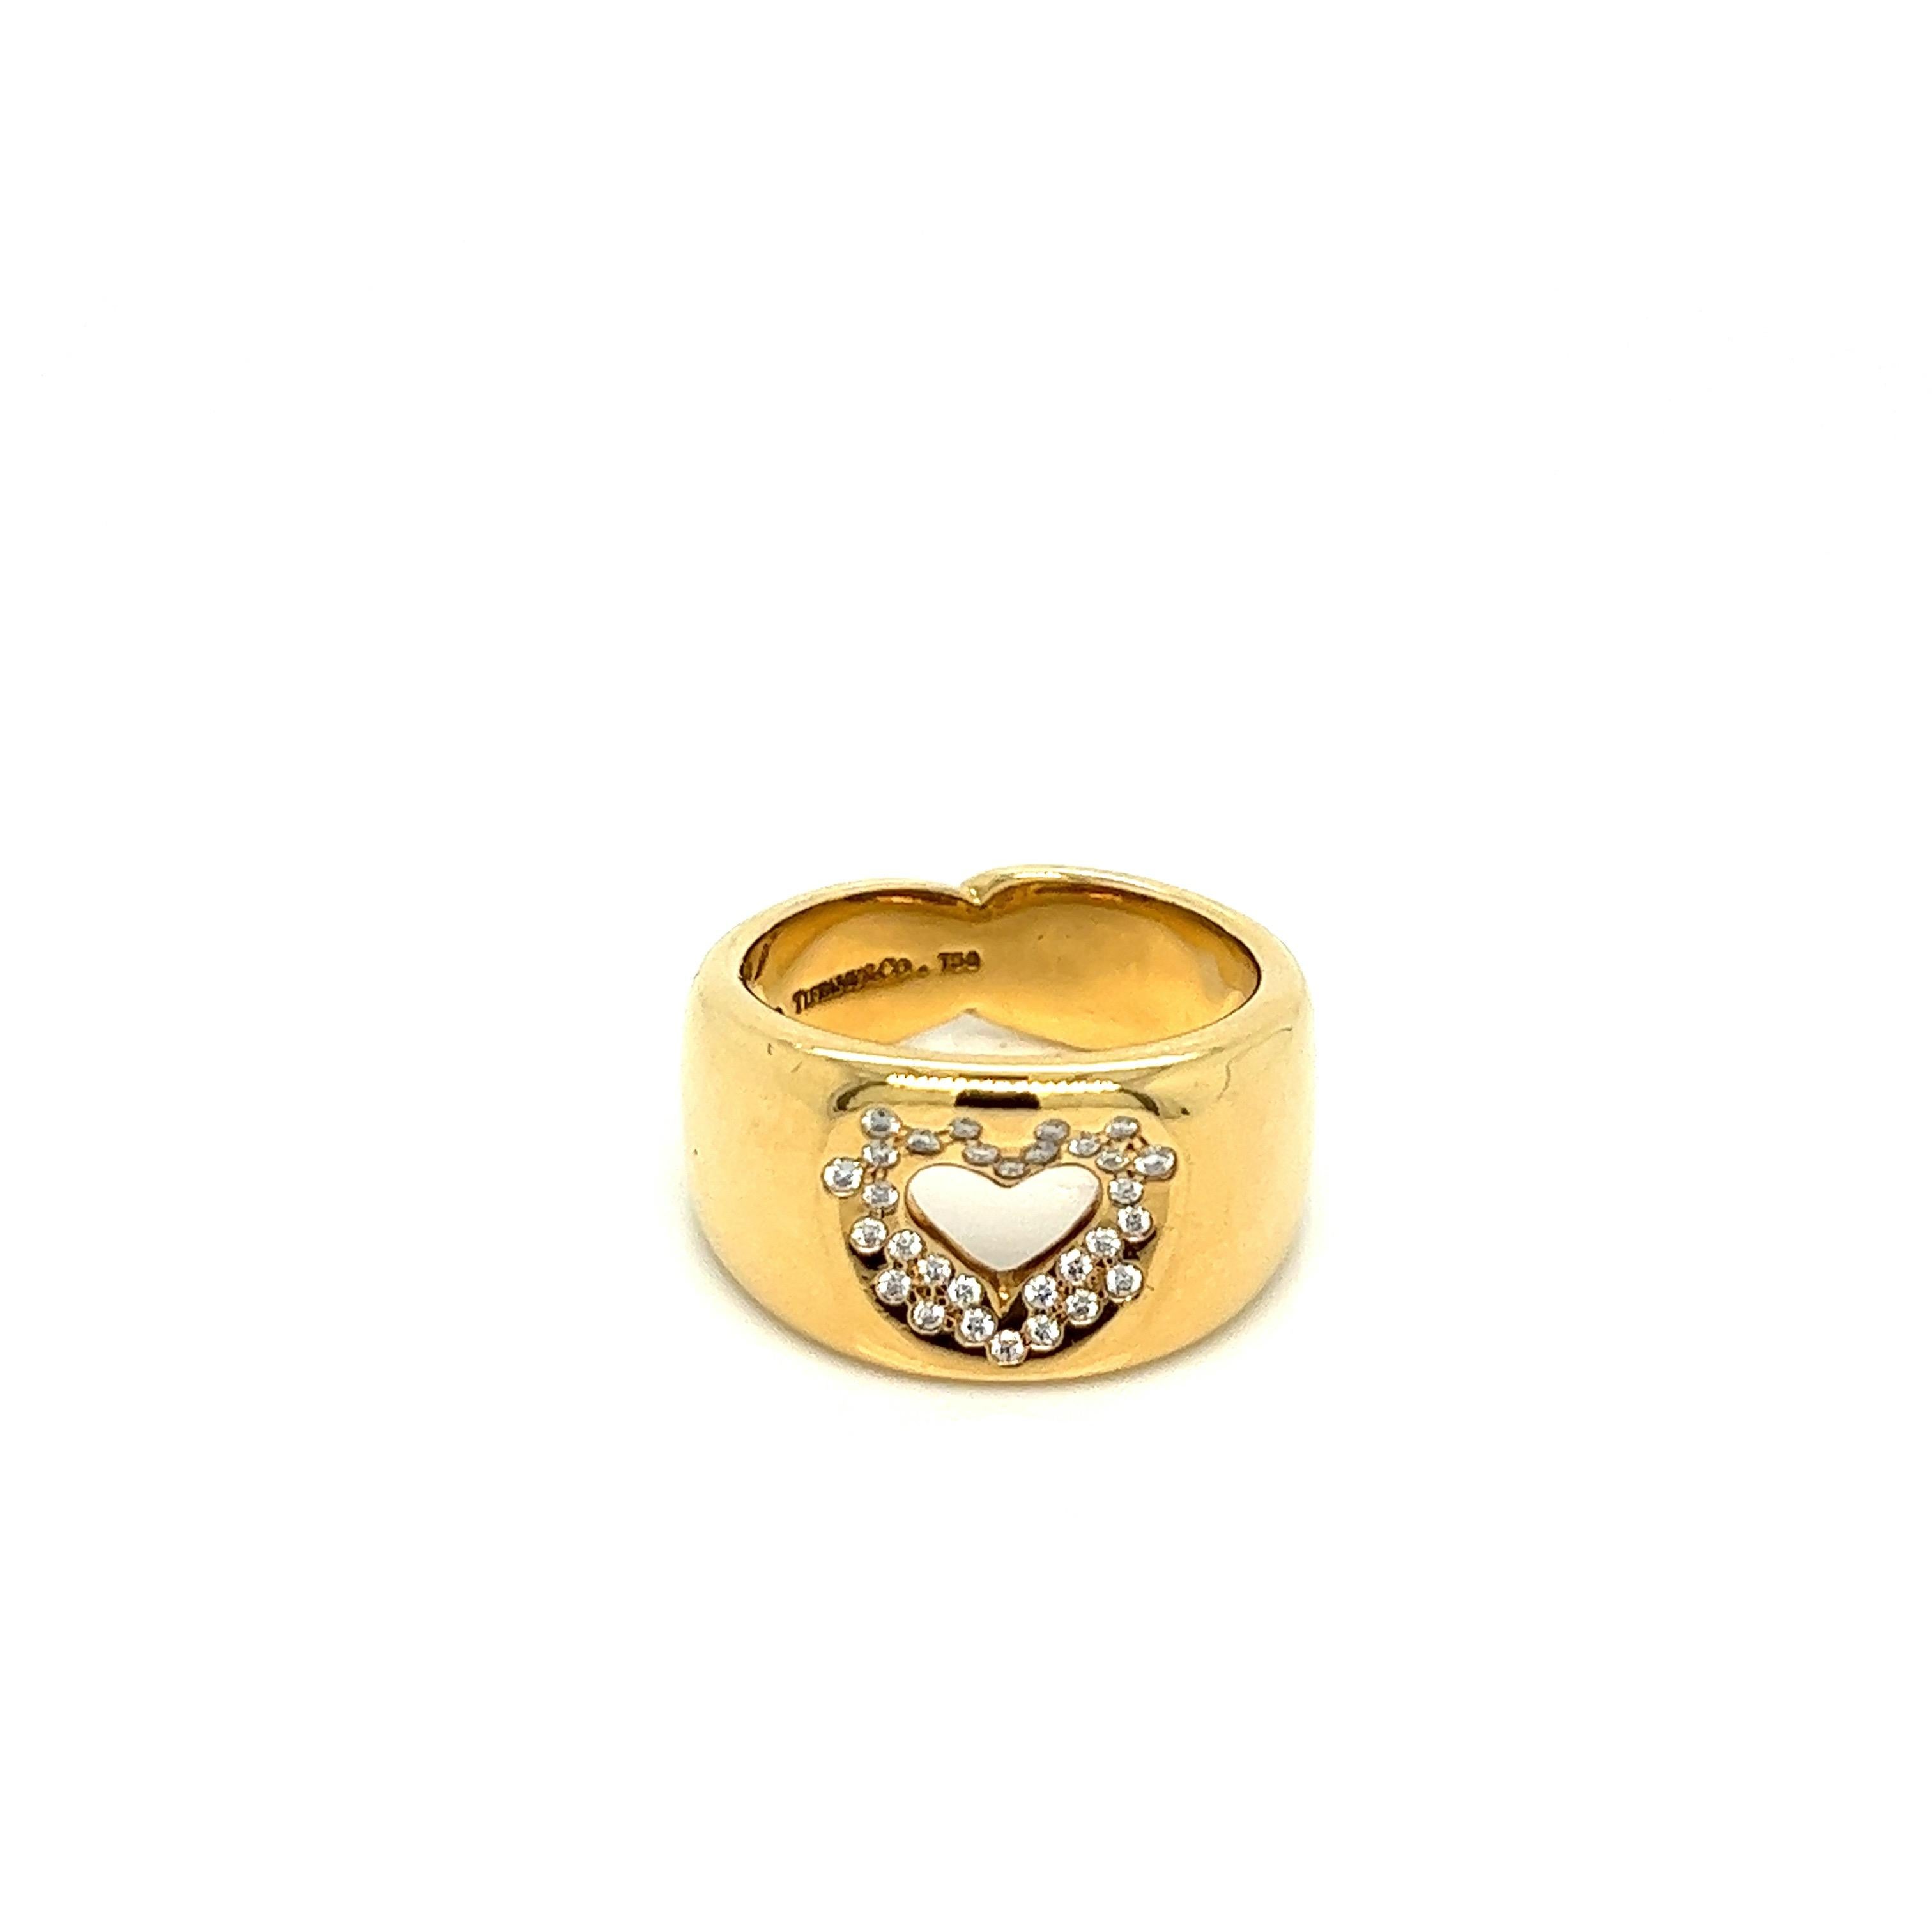 Tiffany & Co. heart diamond gold ring

Round-cut diamonds of approximately 0.30 carat, 18 karat yellow gold; marked Tiffany & Co., 750

Size: 6.75 US, width 11.5 mm
Total weight: 13.7 grams